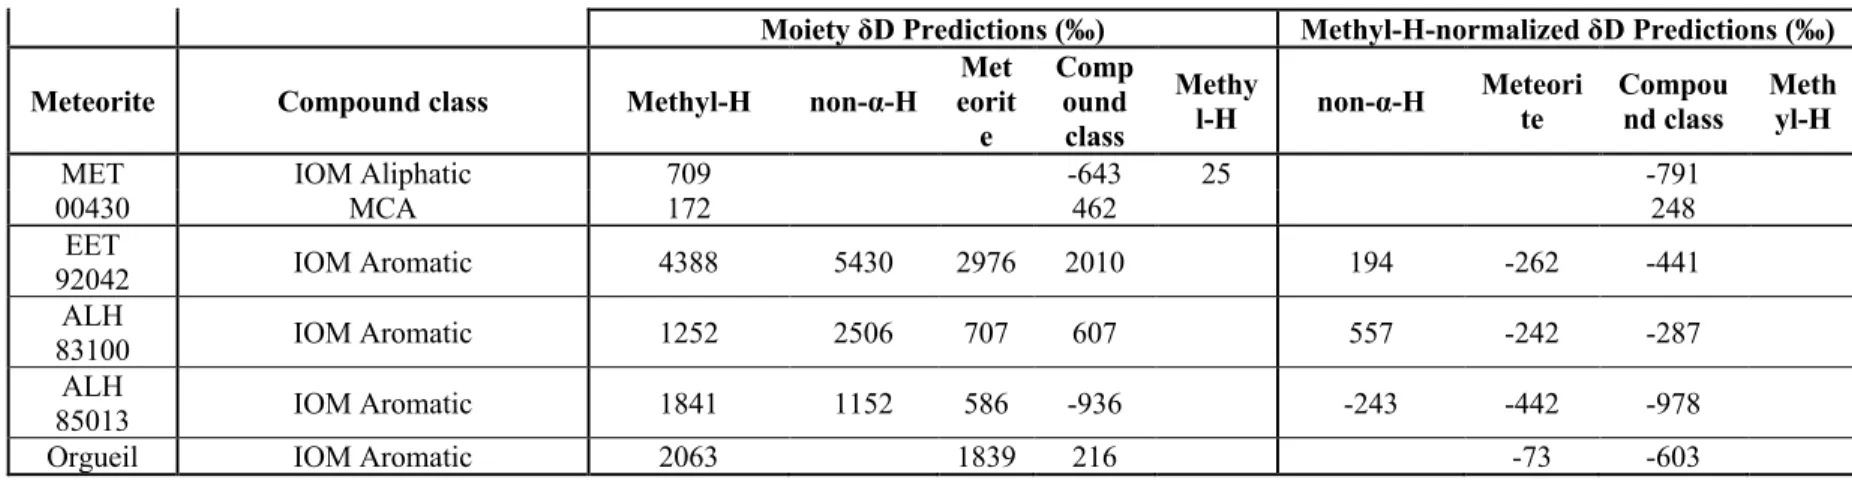 Table 5.5: Predictions of hydrogen moiety δD values in ‰ units. 